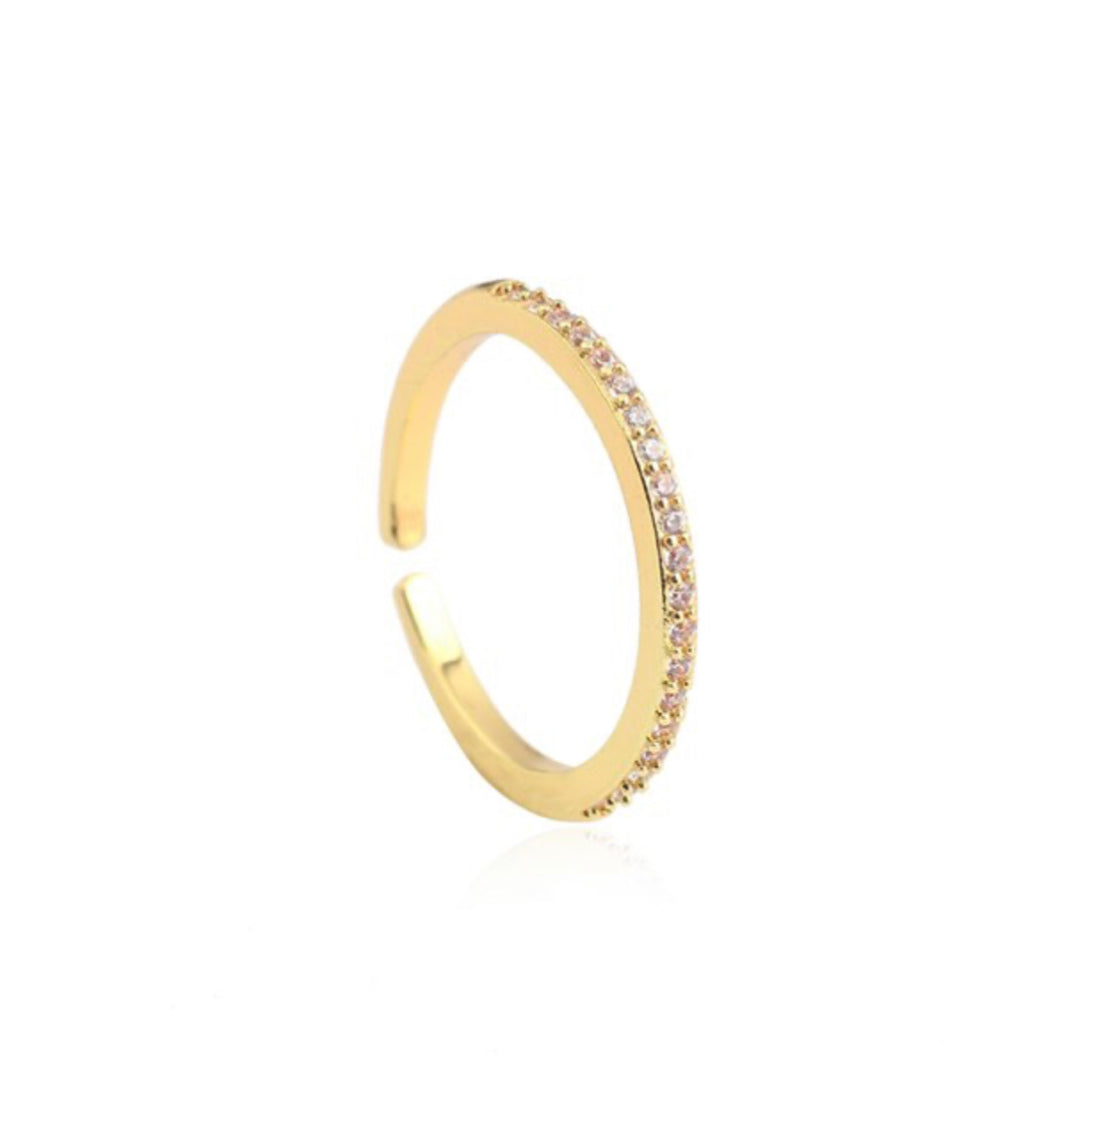 See No Evil 18K Gold Plated Eternity Band Ring by Yoga Republik